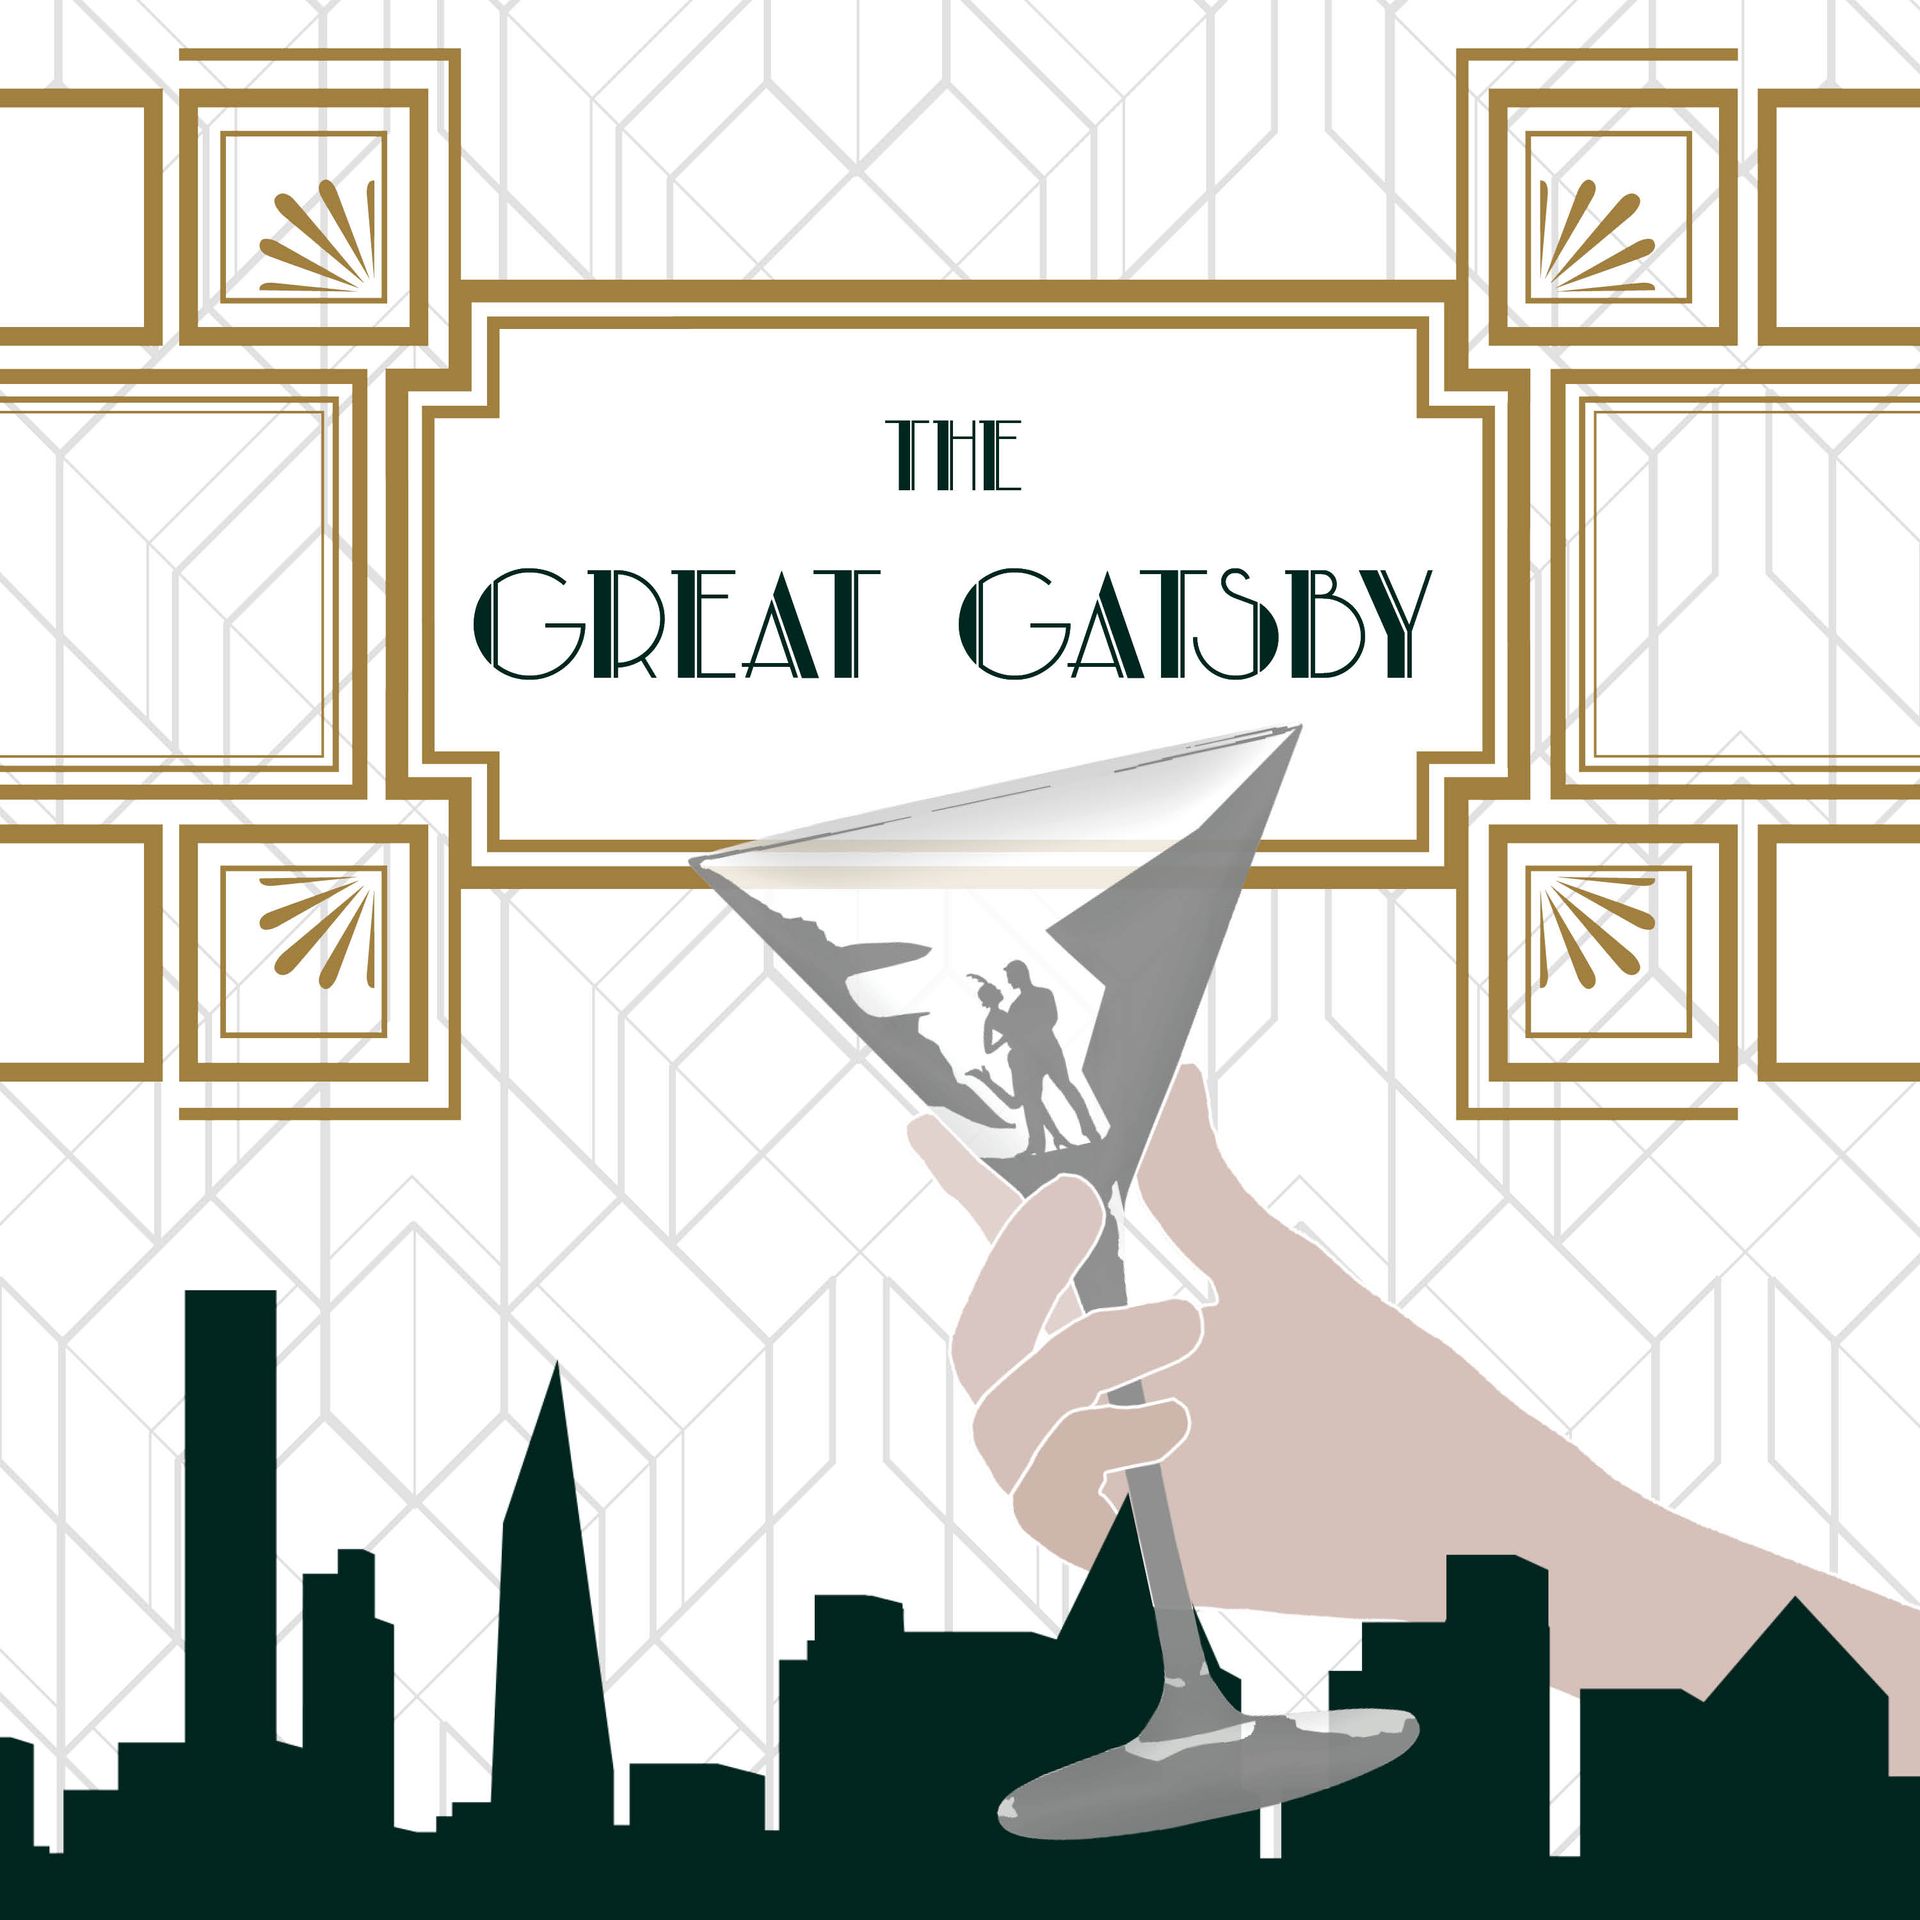 A poster for the great gatsby with a hand holding a martini glass